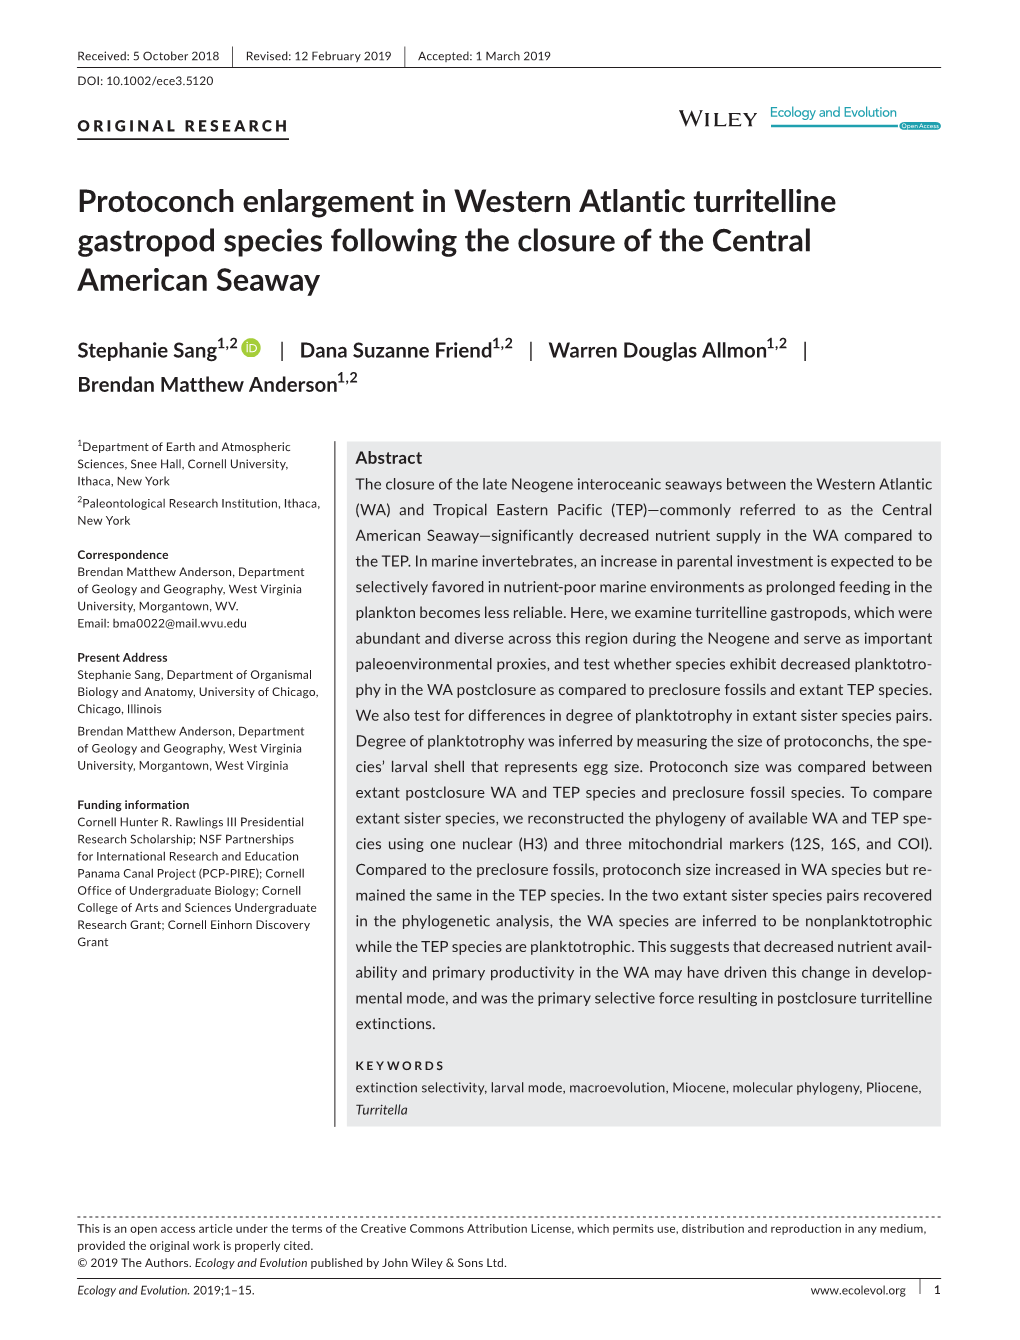 Protoconch Enlargement in Western Atlantic Turritelline Gastropod Species Following the Closure of the Central American Seaway